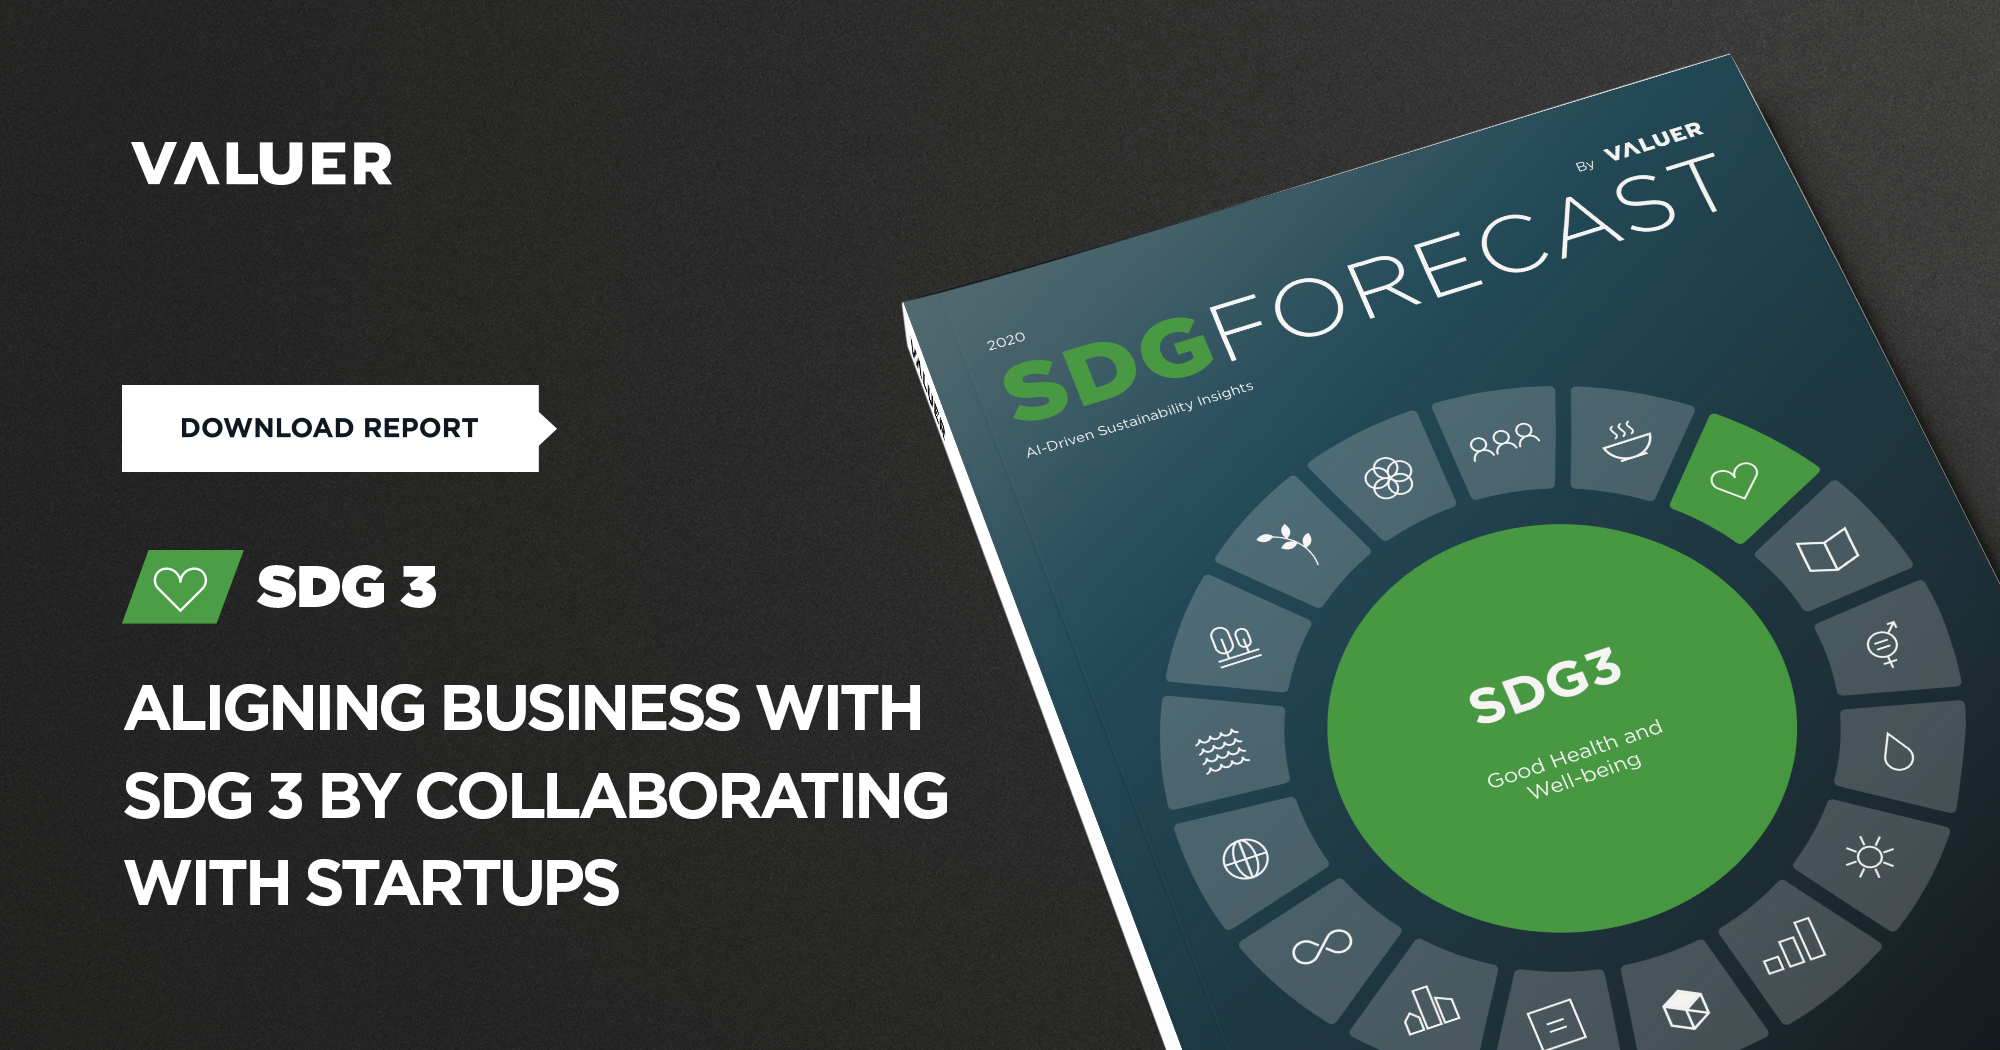 Aligning Business with SDG 3 by Collaborating With Startups